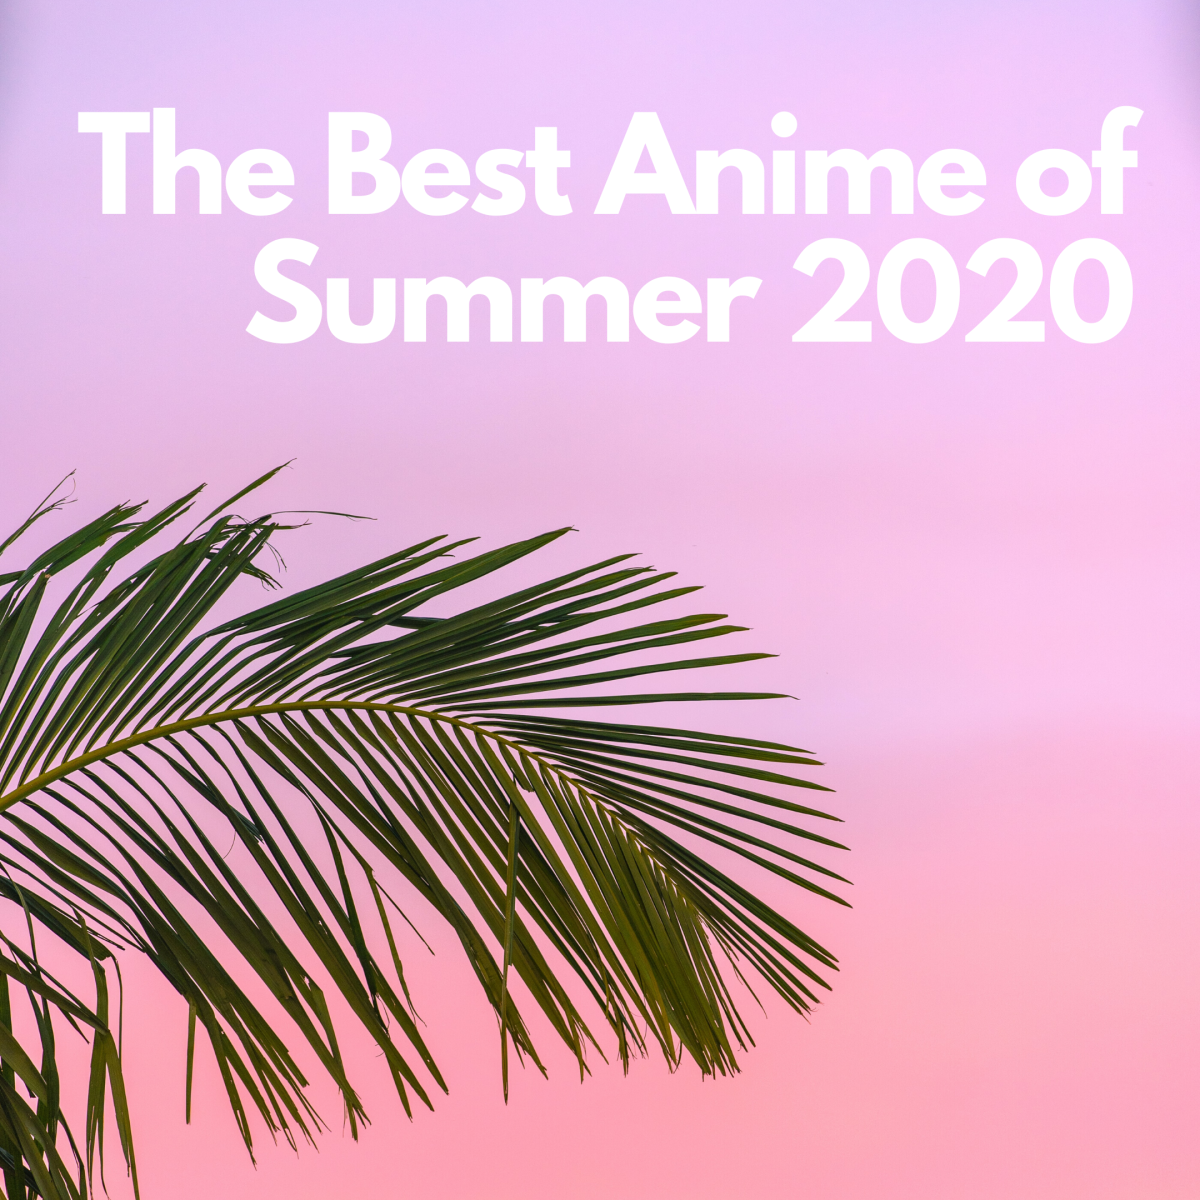 Top 5 Anime of Summer 2020